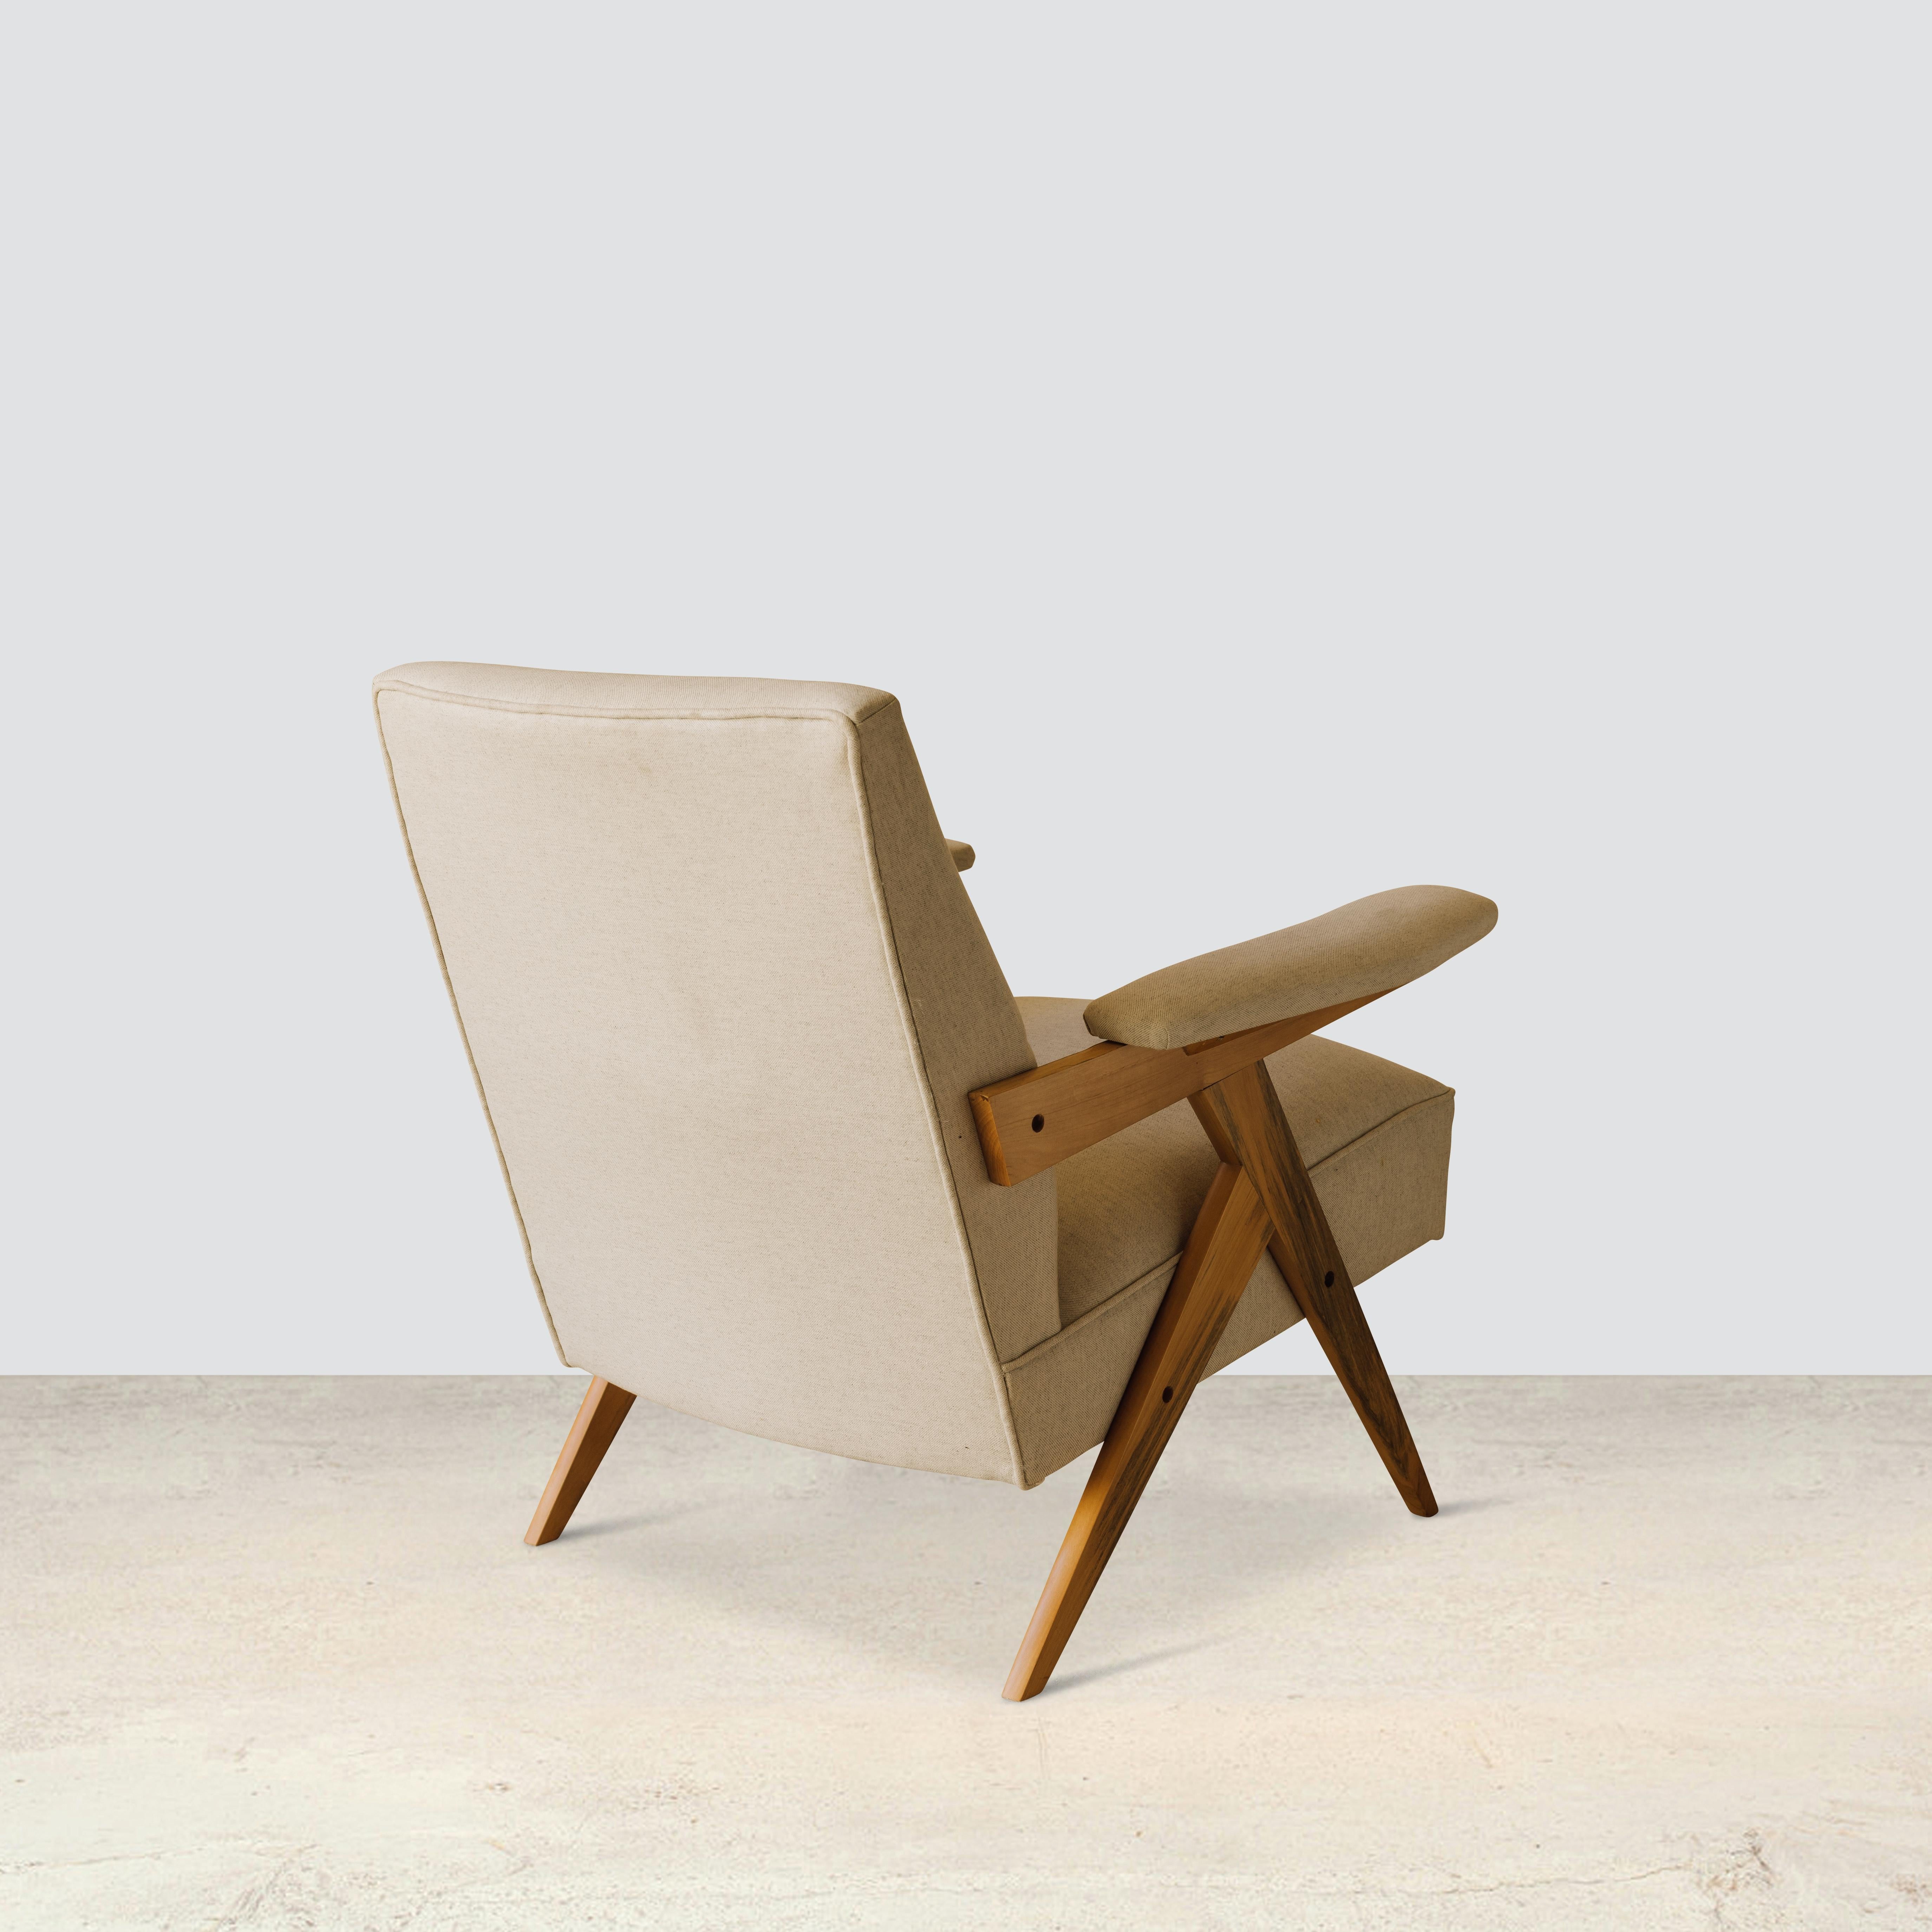 Z Lounge armchair by Zanine Caldas 1950 In Good Condition For Sale In Melides, PT